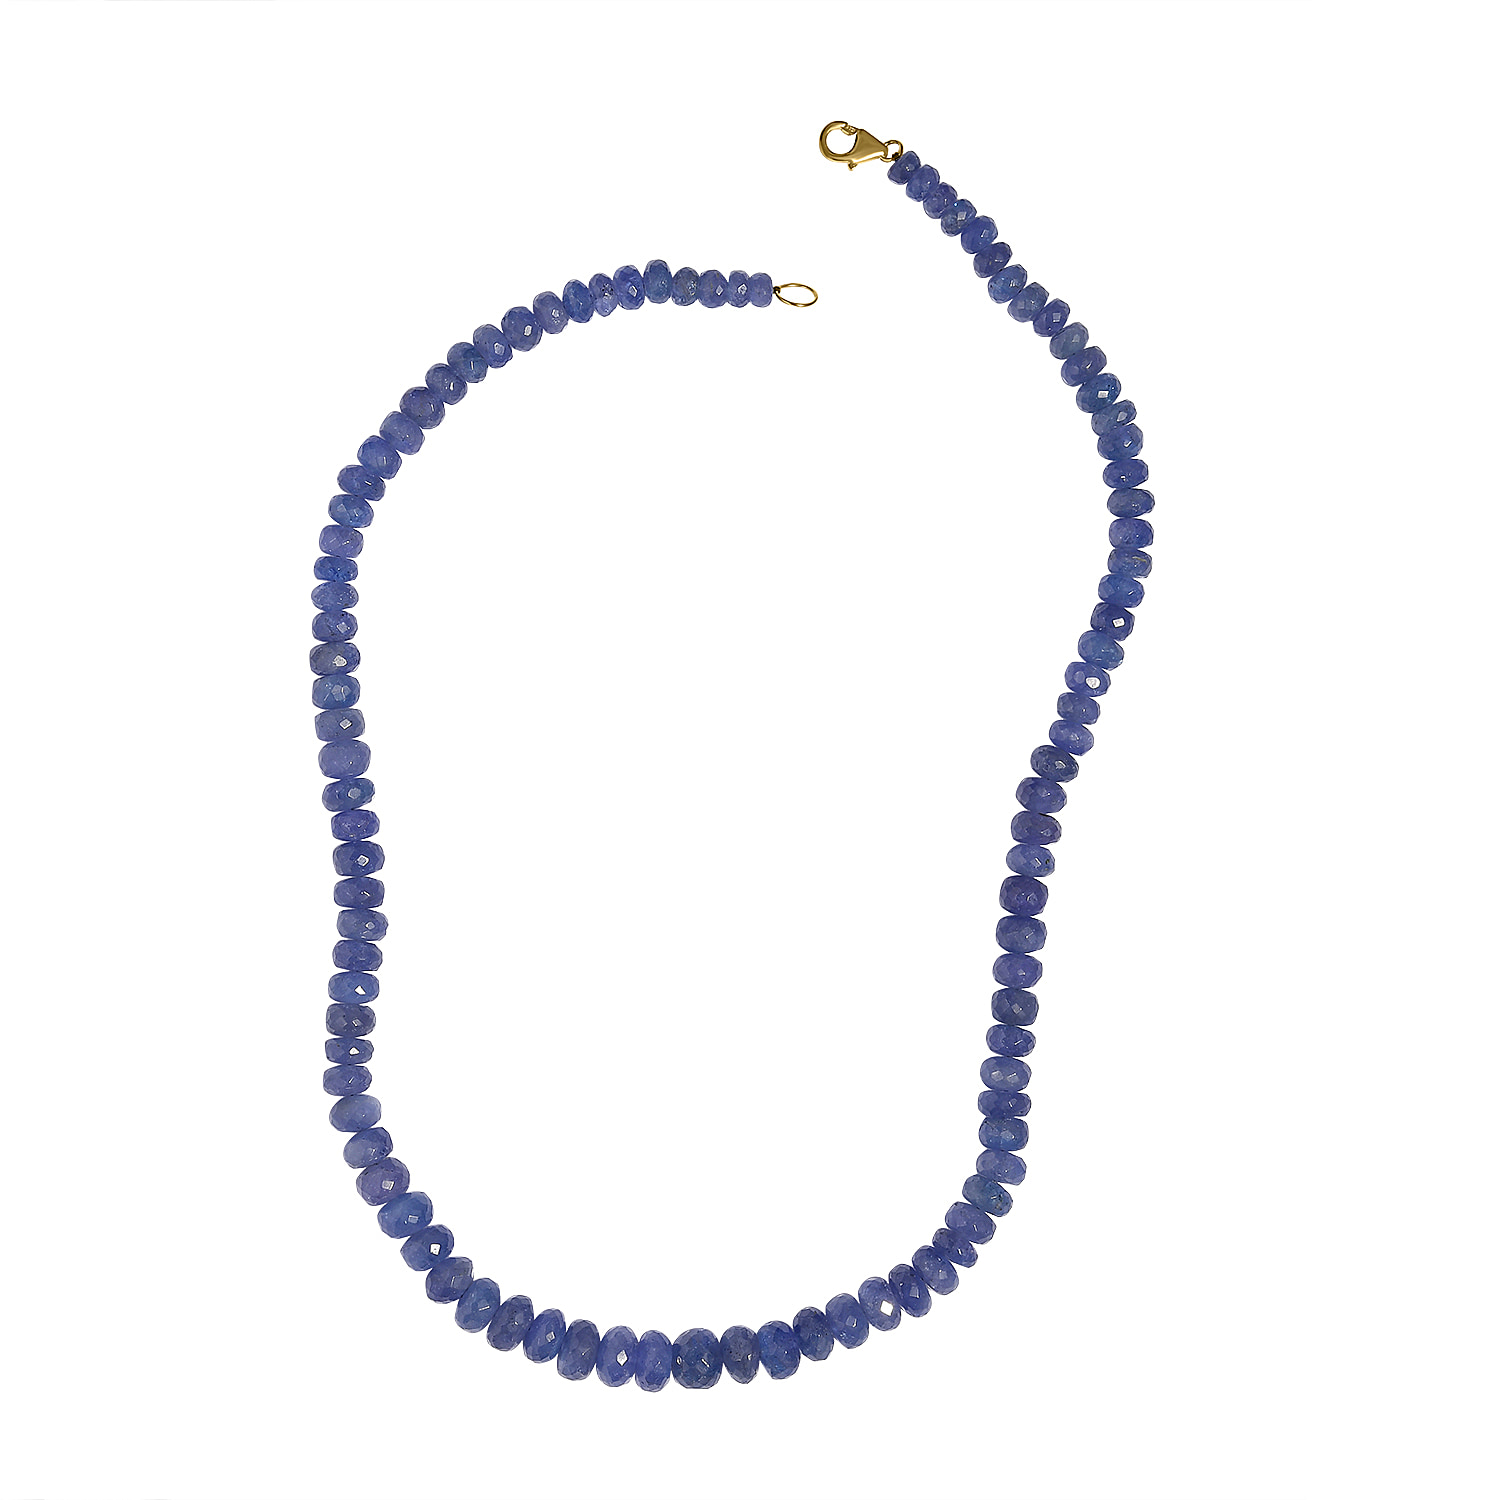 The Majestic Treasure Of Tanzania- 250ct Vivid Deep Blue Faceted Tanzanite Necklace (Size 18)  in 9K Gold